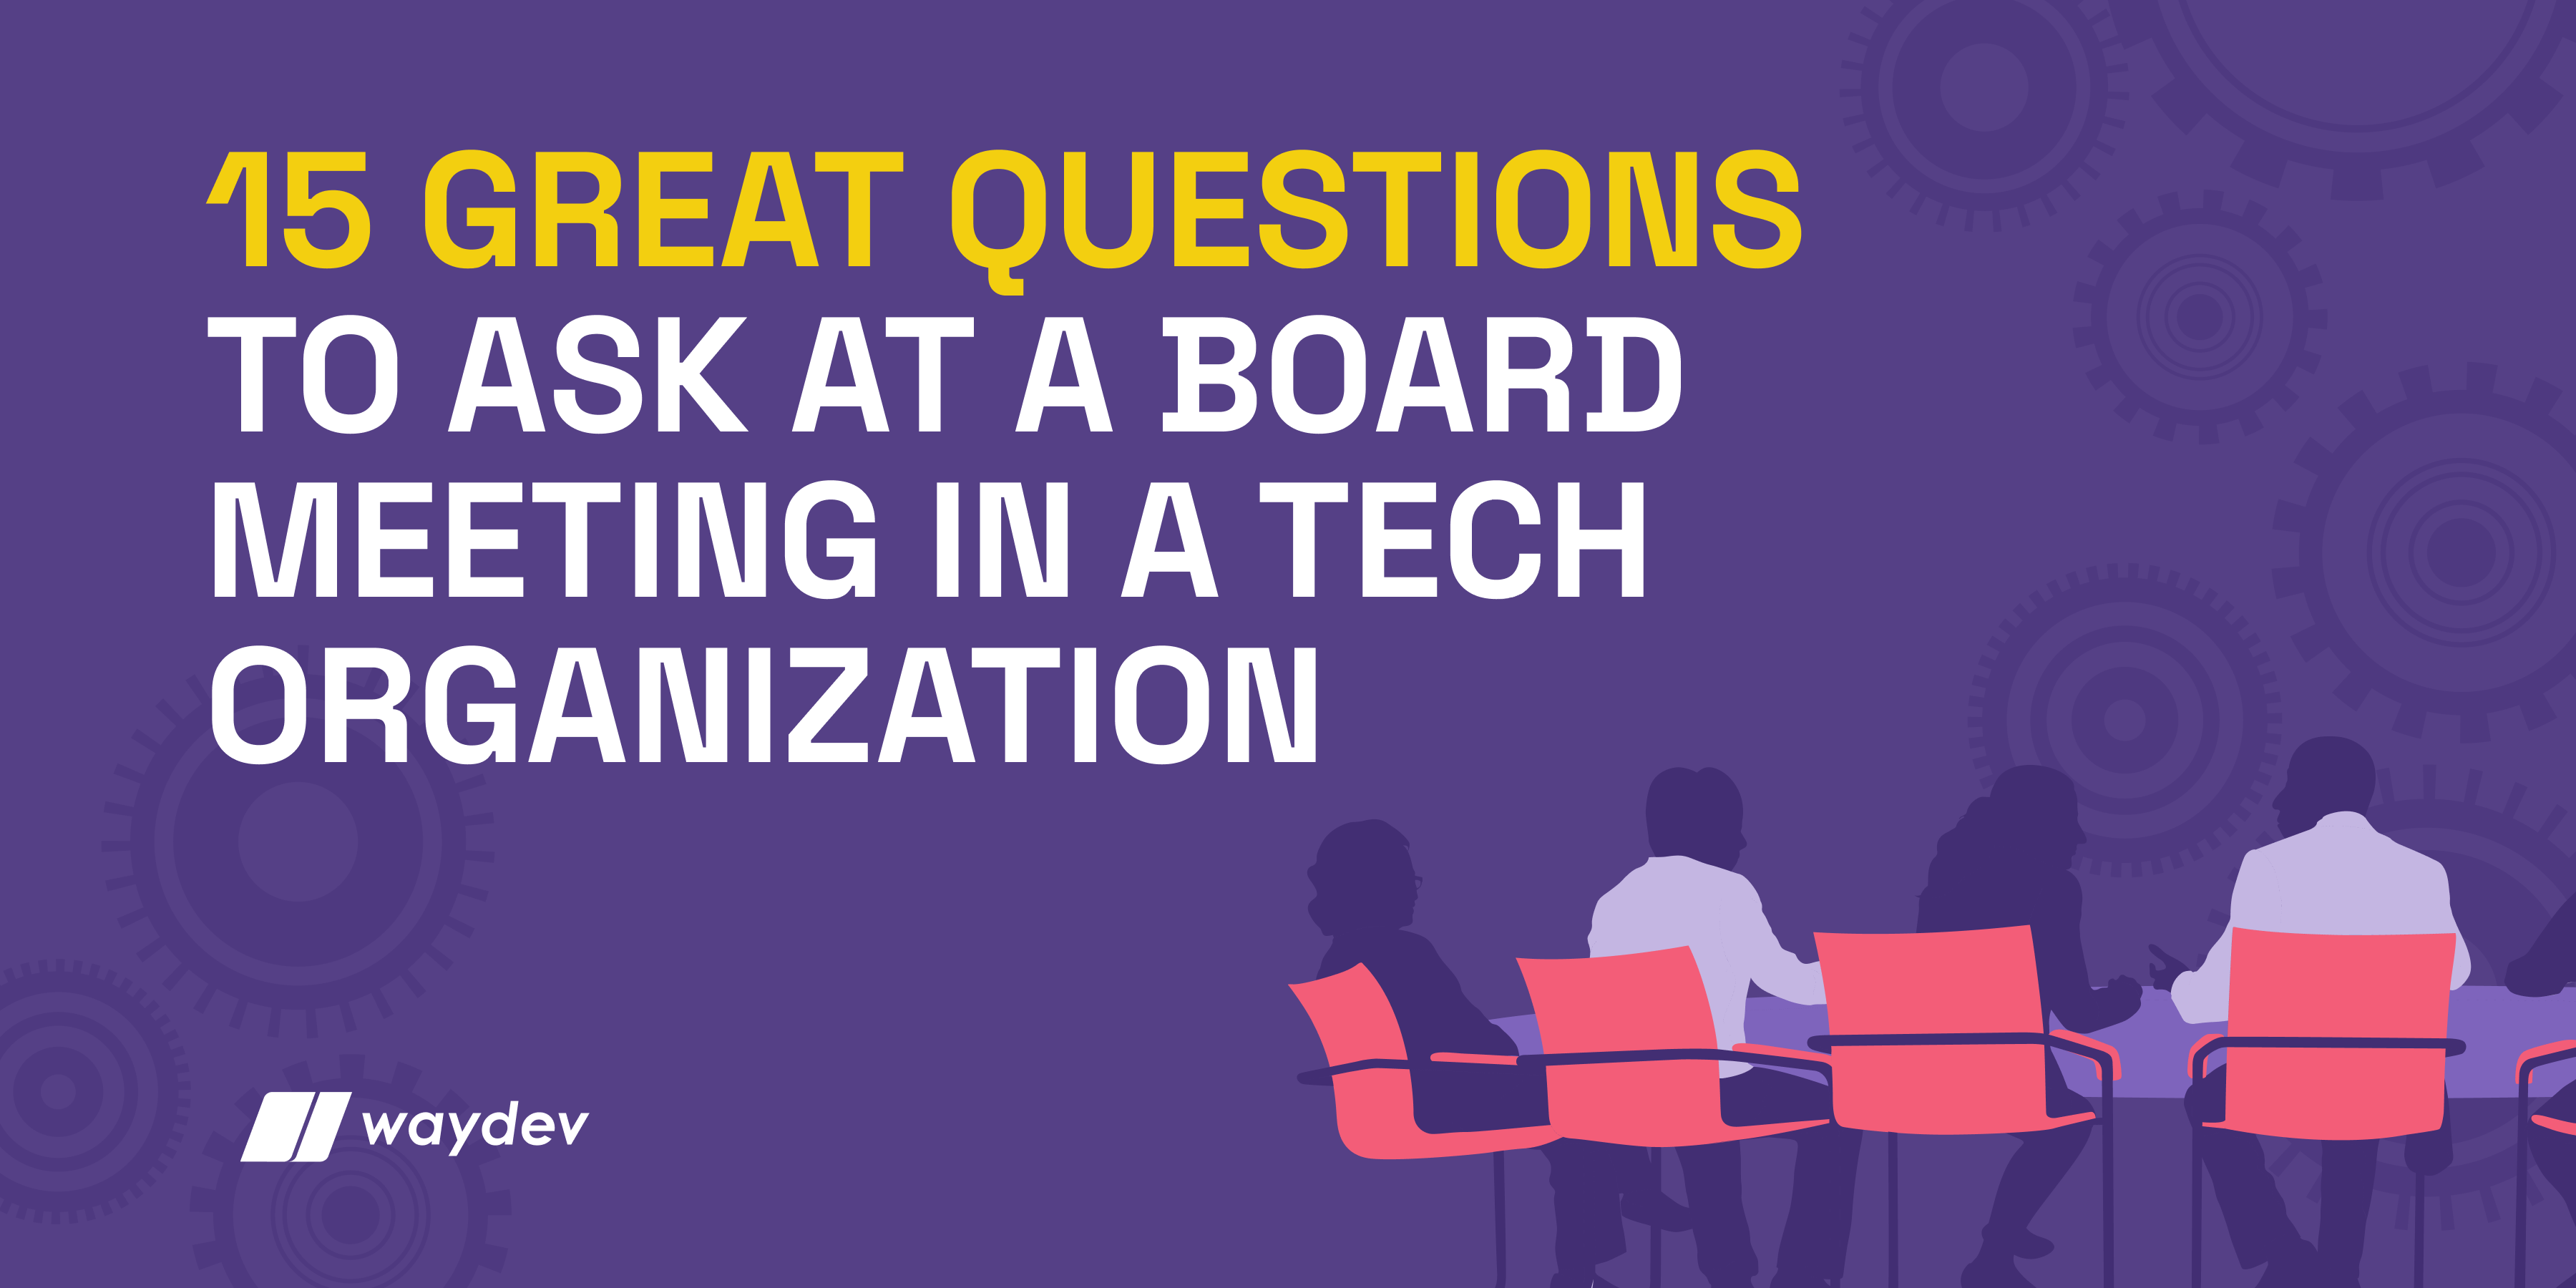 15 Great Questions to Ask at a Board Meeting in a Tech